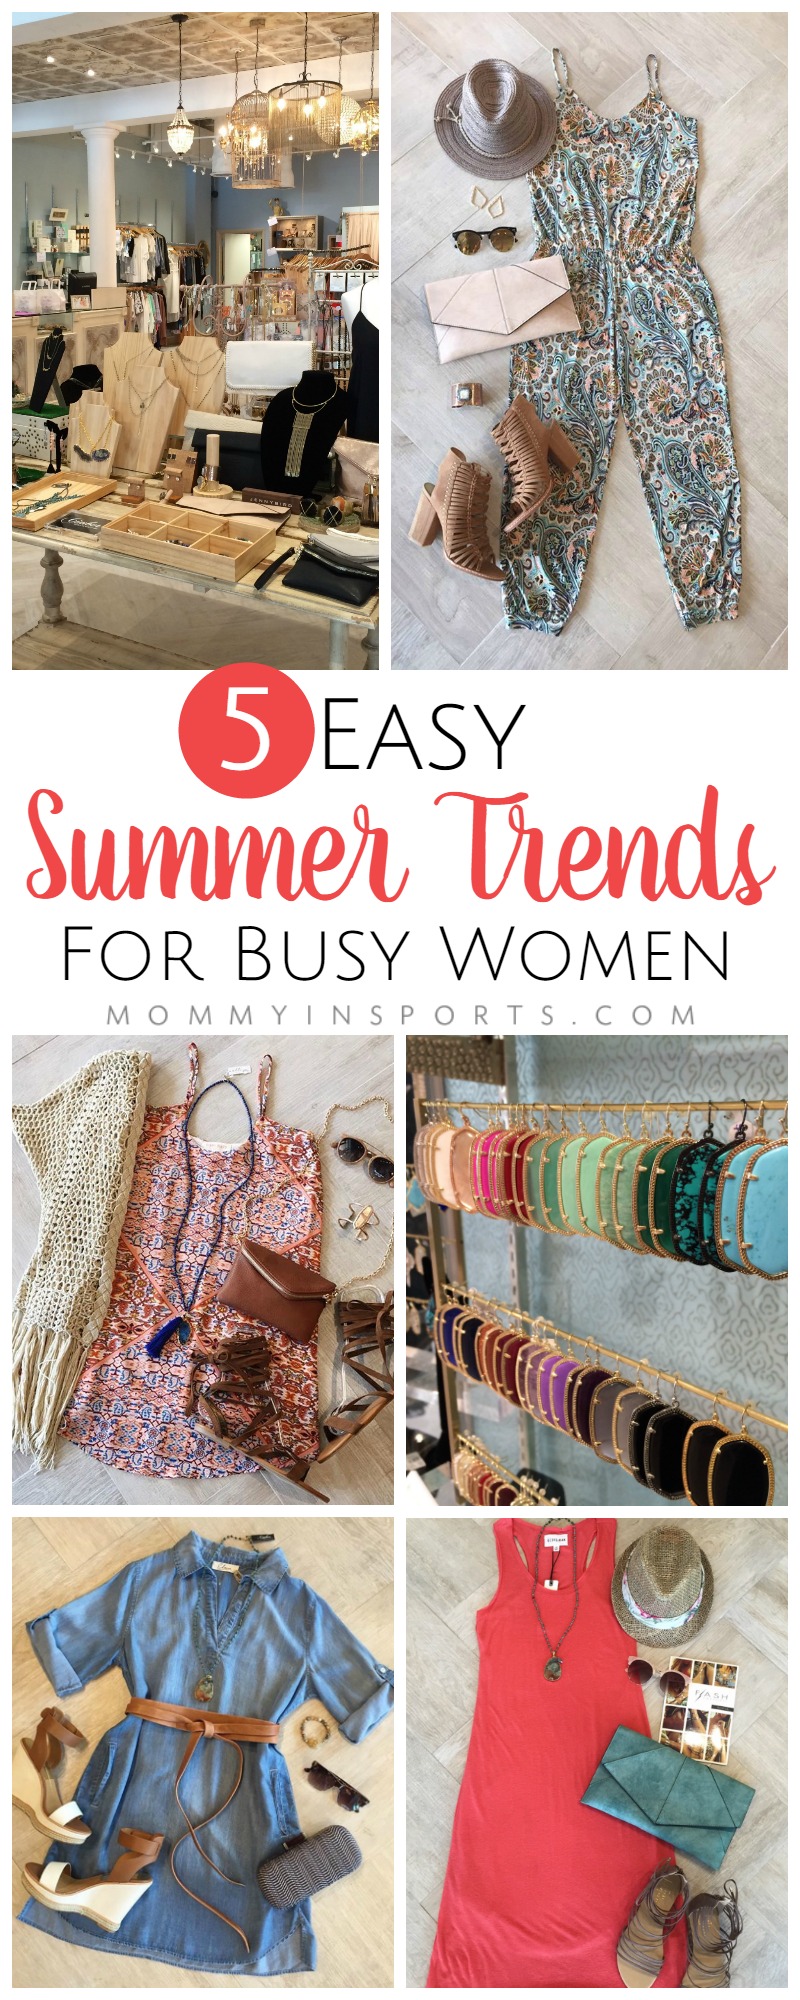 Feeling blah when it comes to summer wardrobe? Be inspired by these 5 Easy Summer Trends for Busy Women! Never worry about your OOTD again!